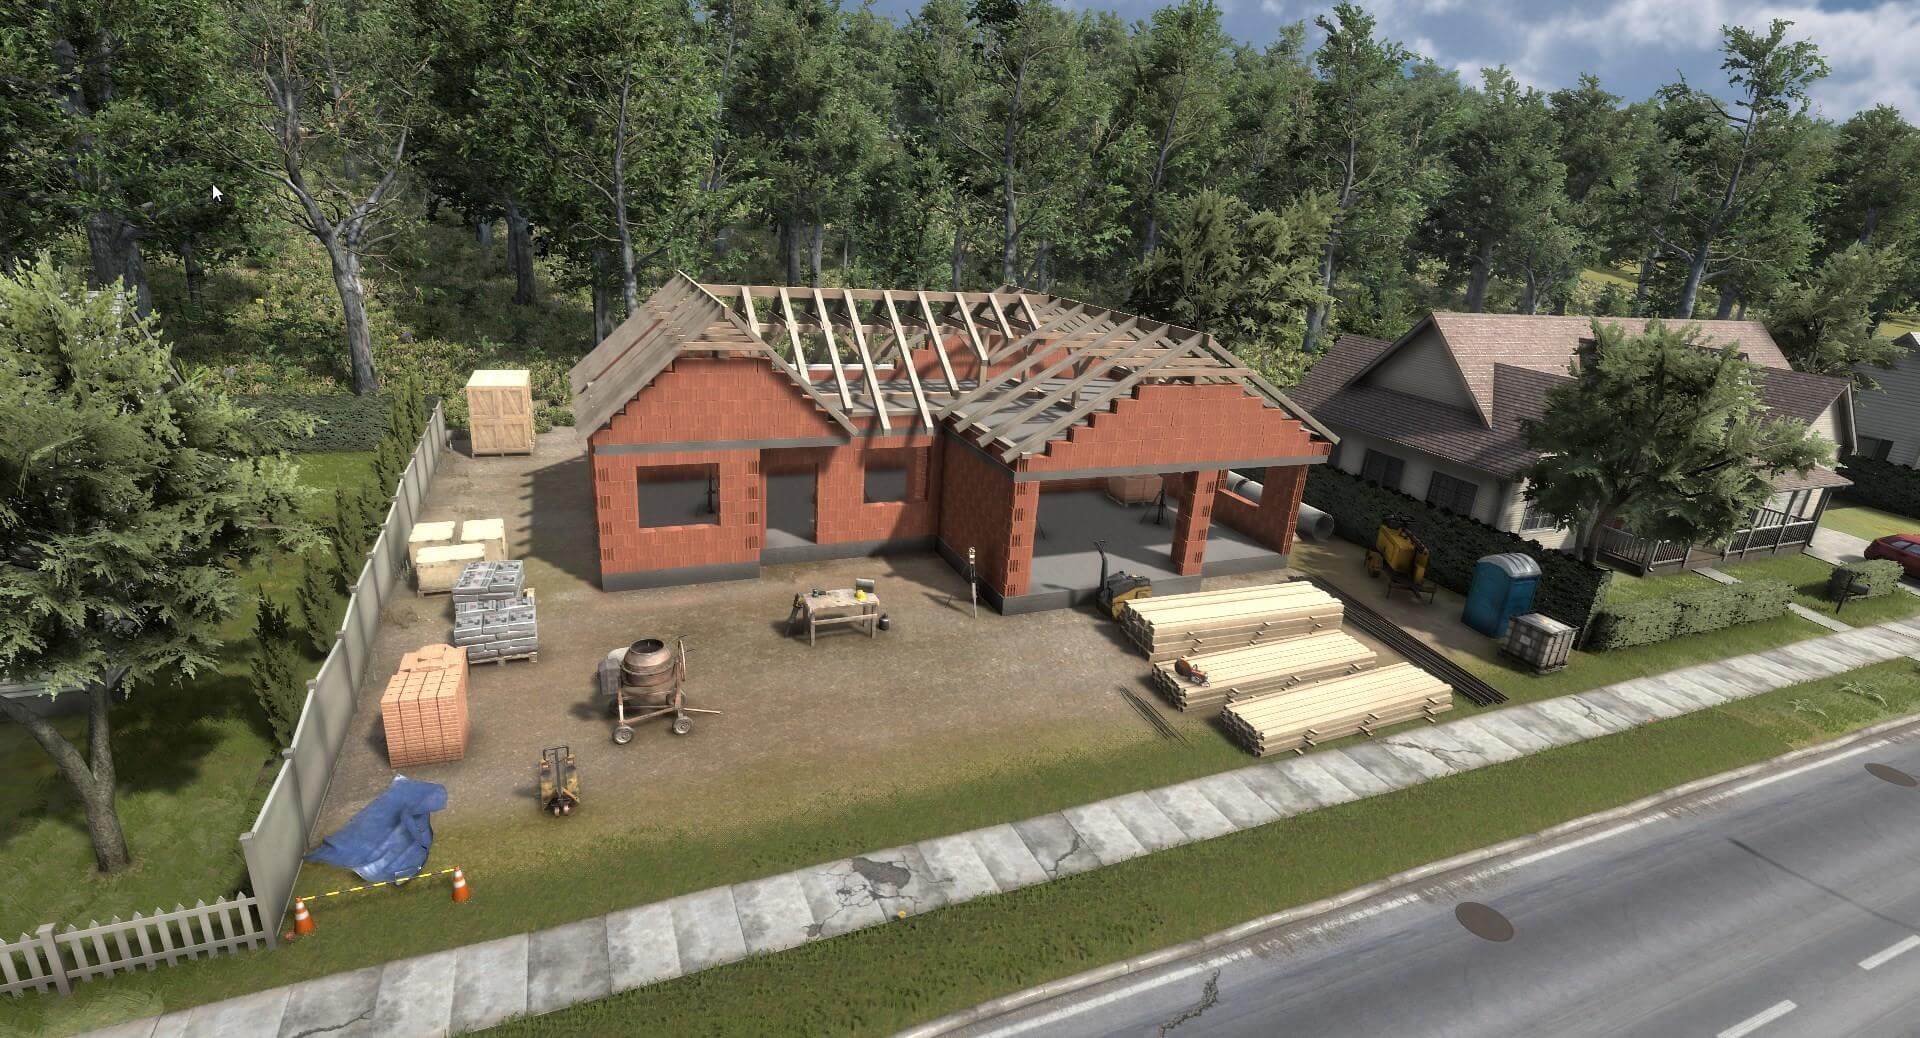 OffRoad Construction Simulator 3D - Heavy Builders instal the new for mac